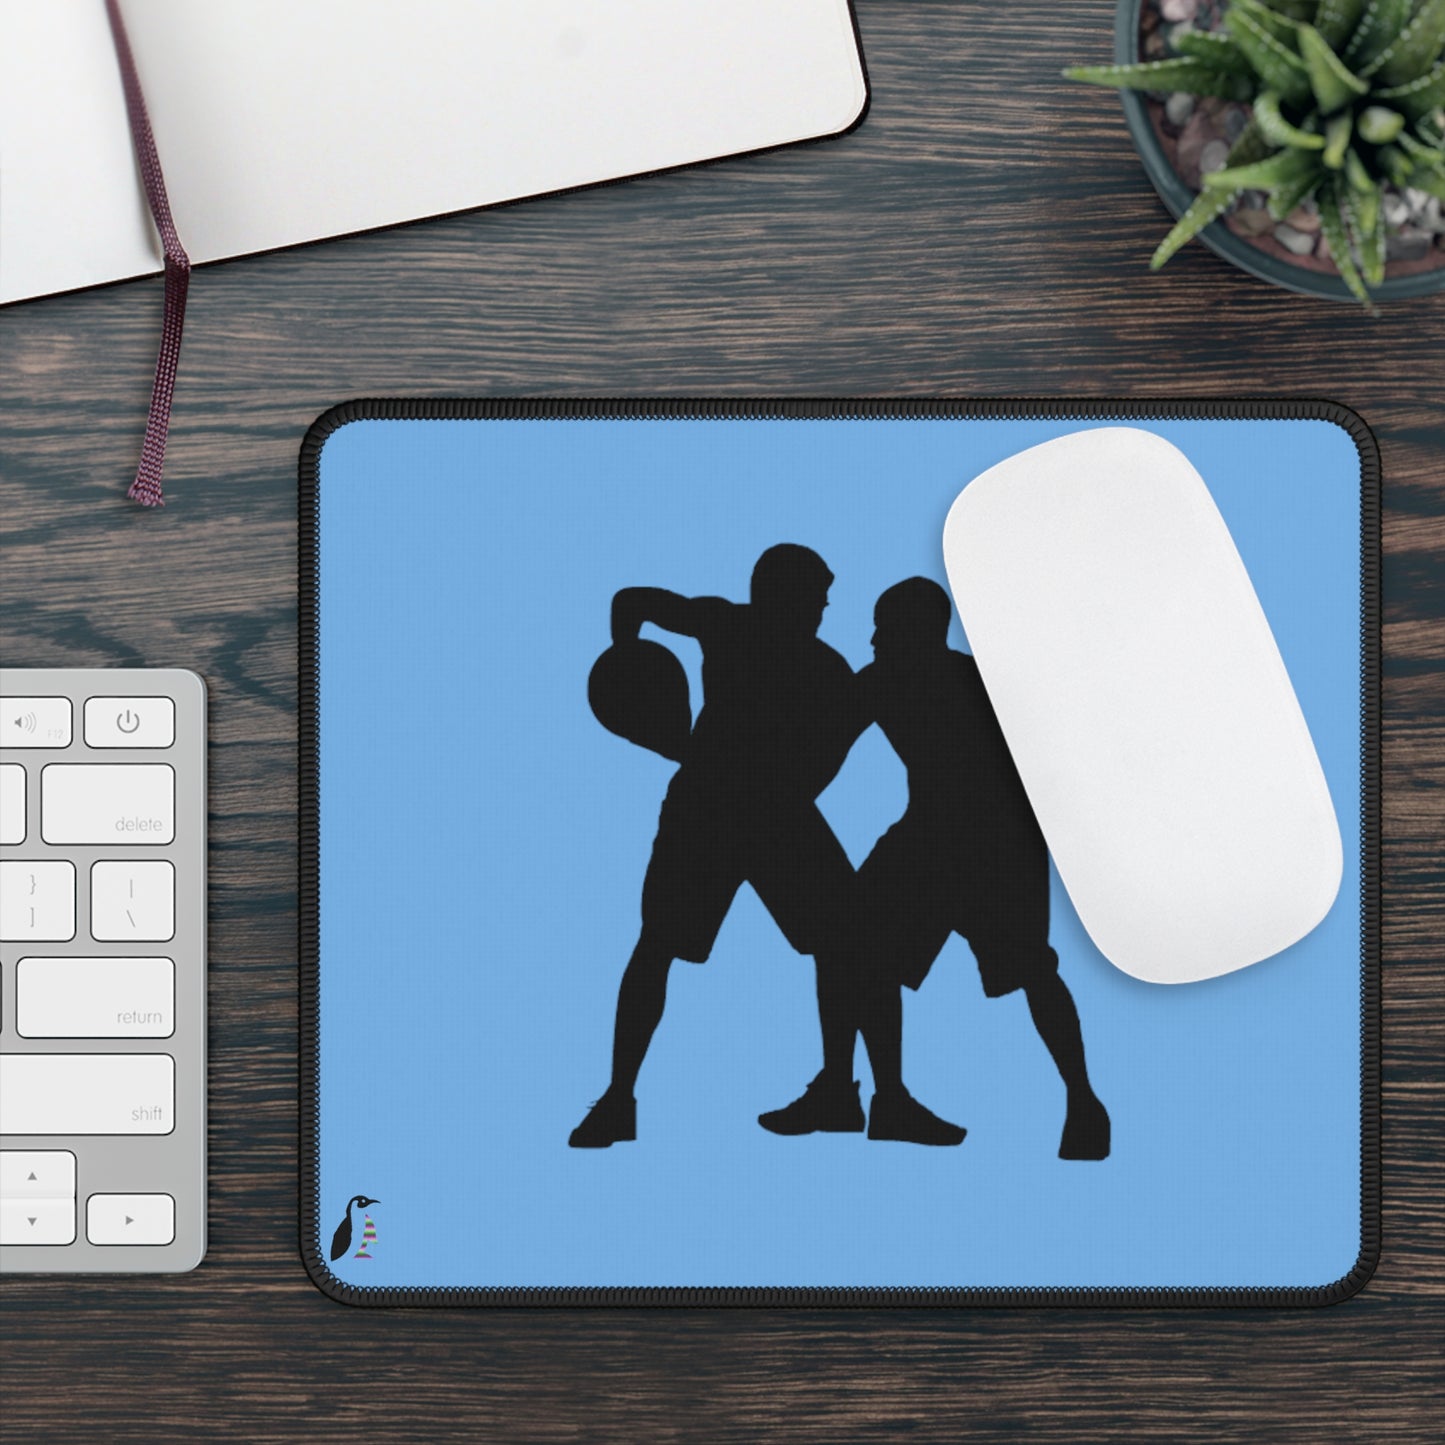 Gaming Mouse Pad: Basketball Lite Blue